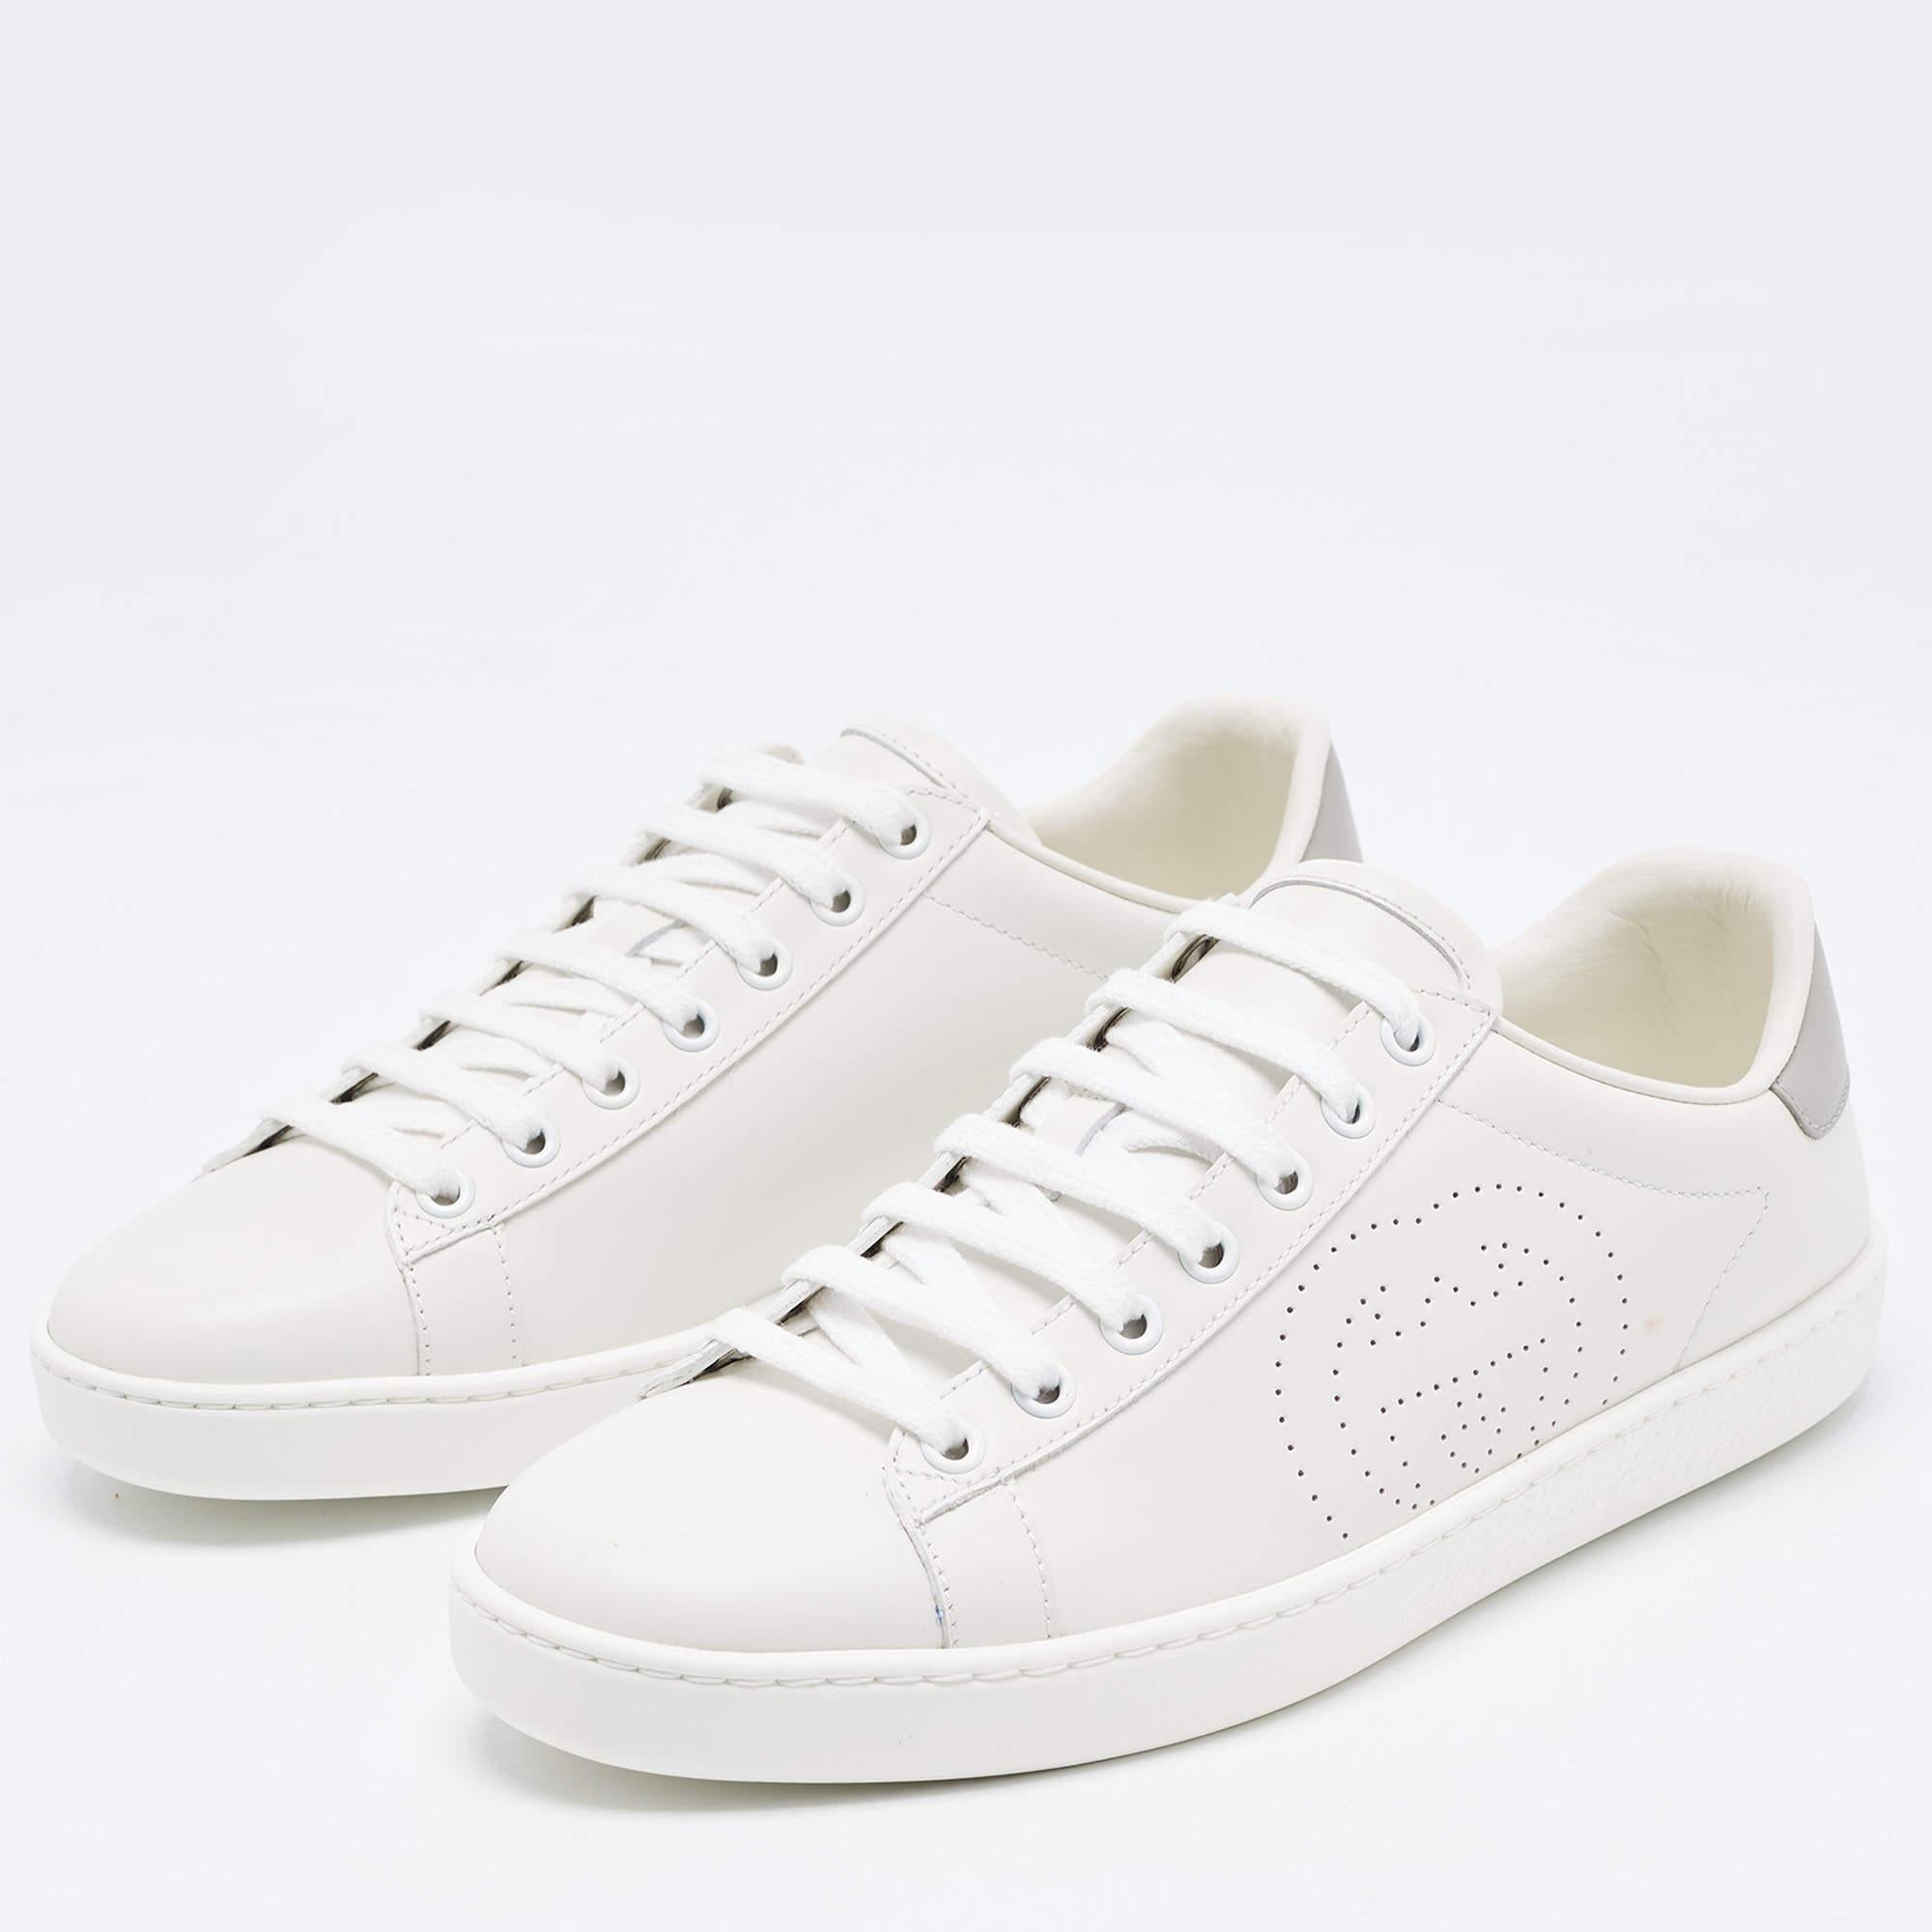 Gucci White Perforated Interlocking G Leather Ace Low Top Sneakers Size 38 4